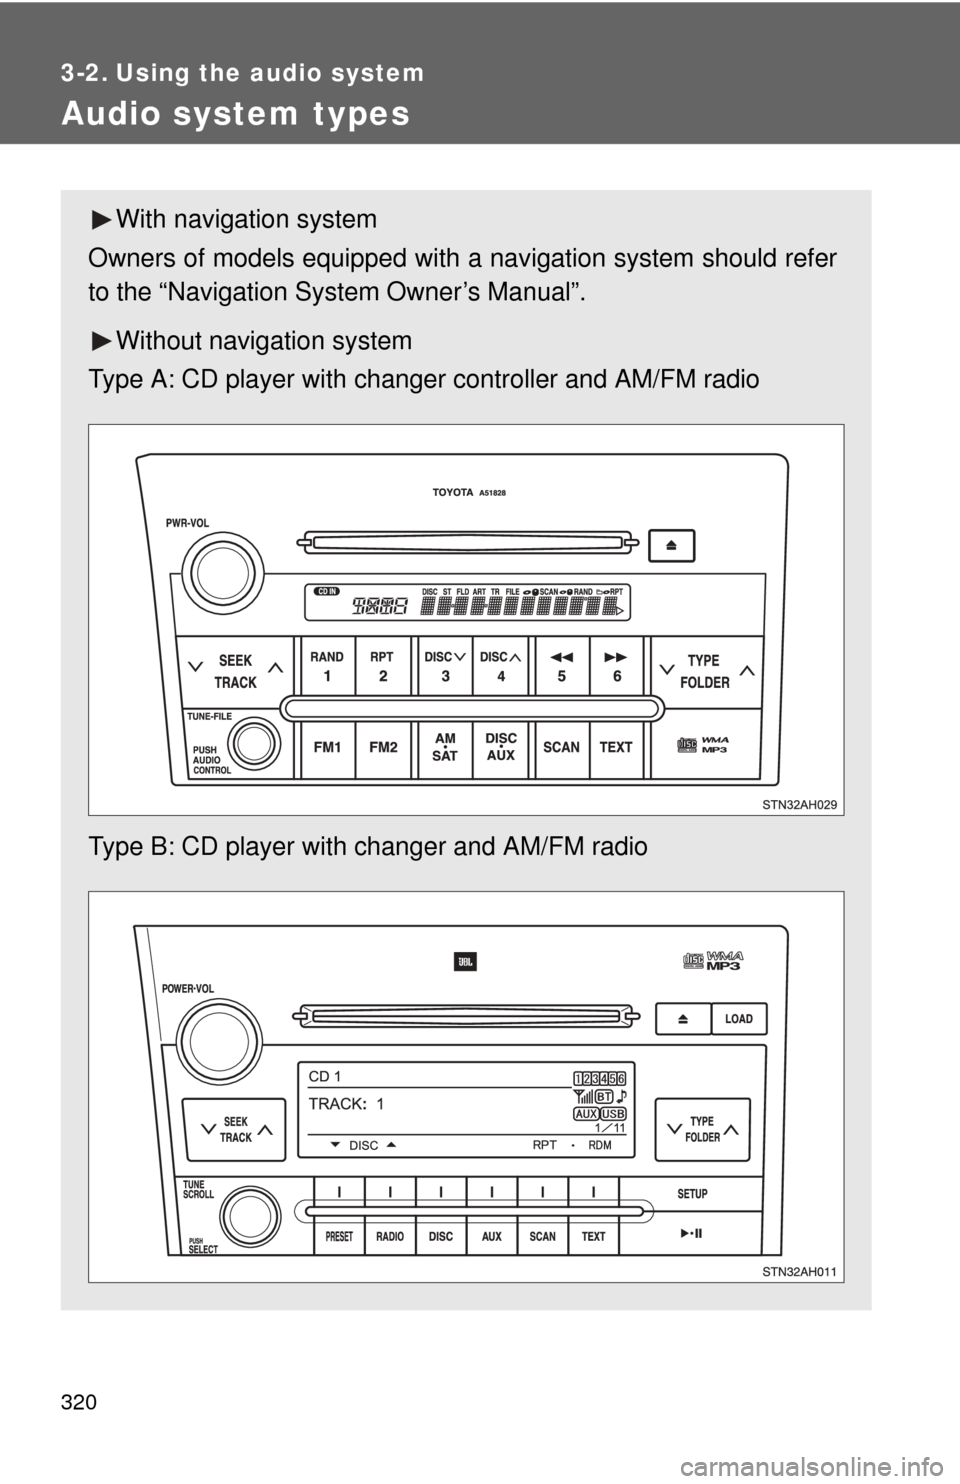 TOYOTA TUNDRA 2013 2.G Owners Manual 320
3-2. Using the audio system
Audio system types
With navigation system
Owners of models equipped with  a navigation system should refer
to the “Navigation System Owner’s Manual”.
Without navi